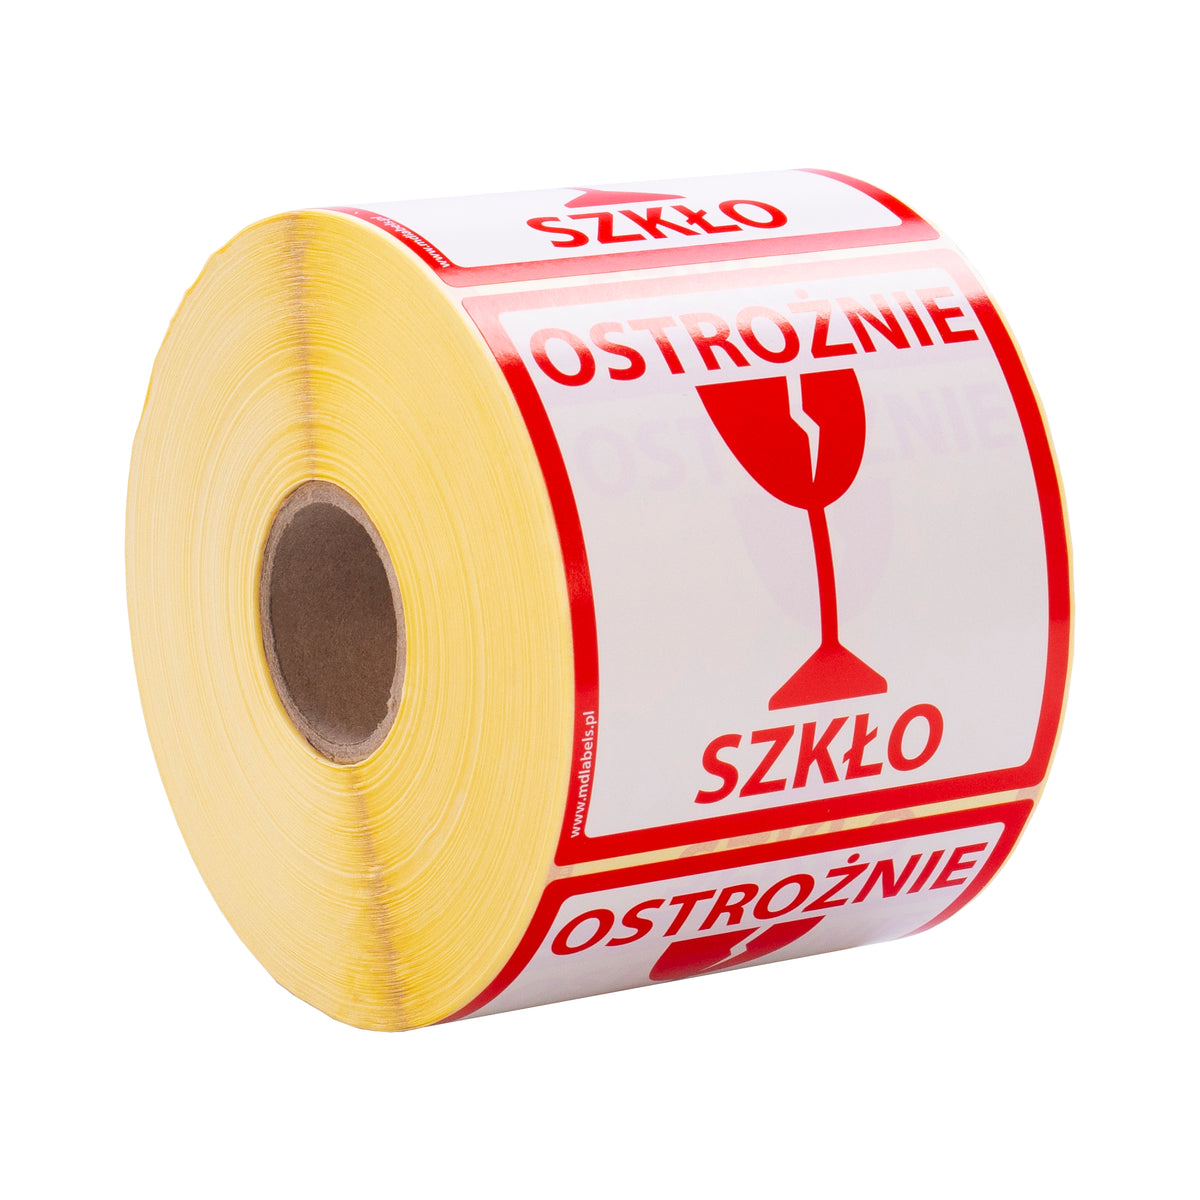 Self-adhesive warning labels - CAUTION GLASS - 98x98mm 1000 per roll